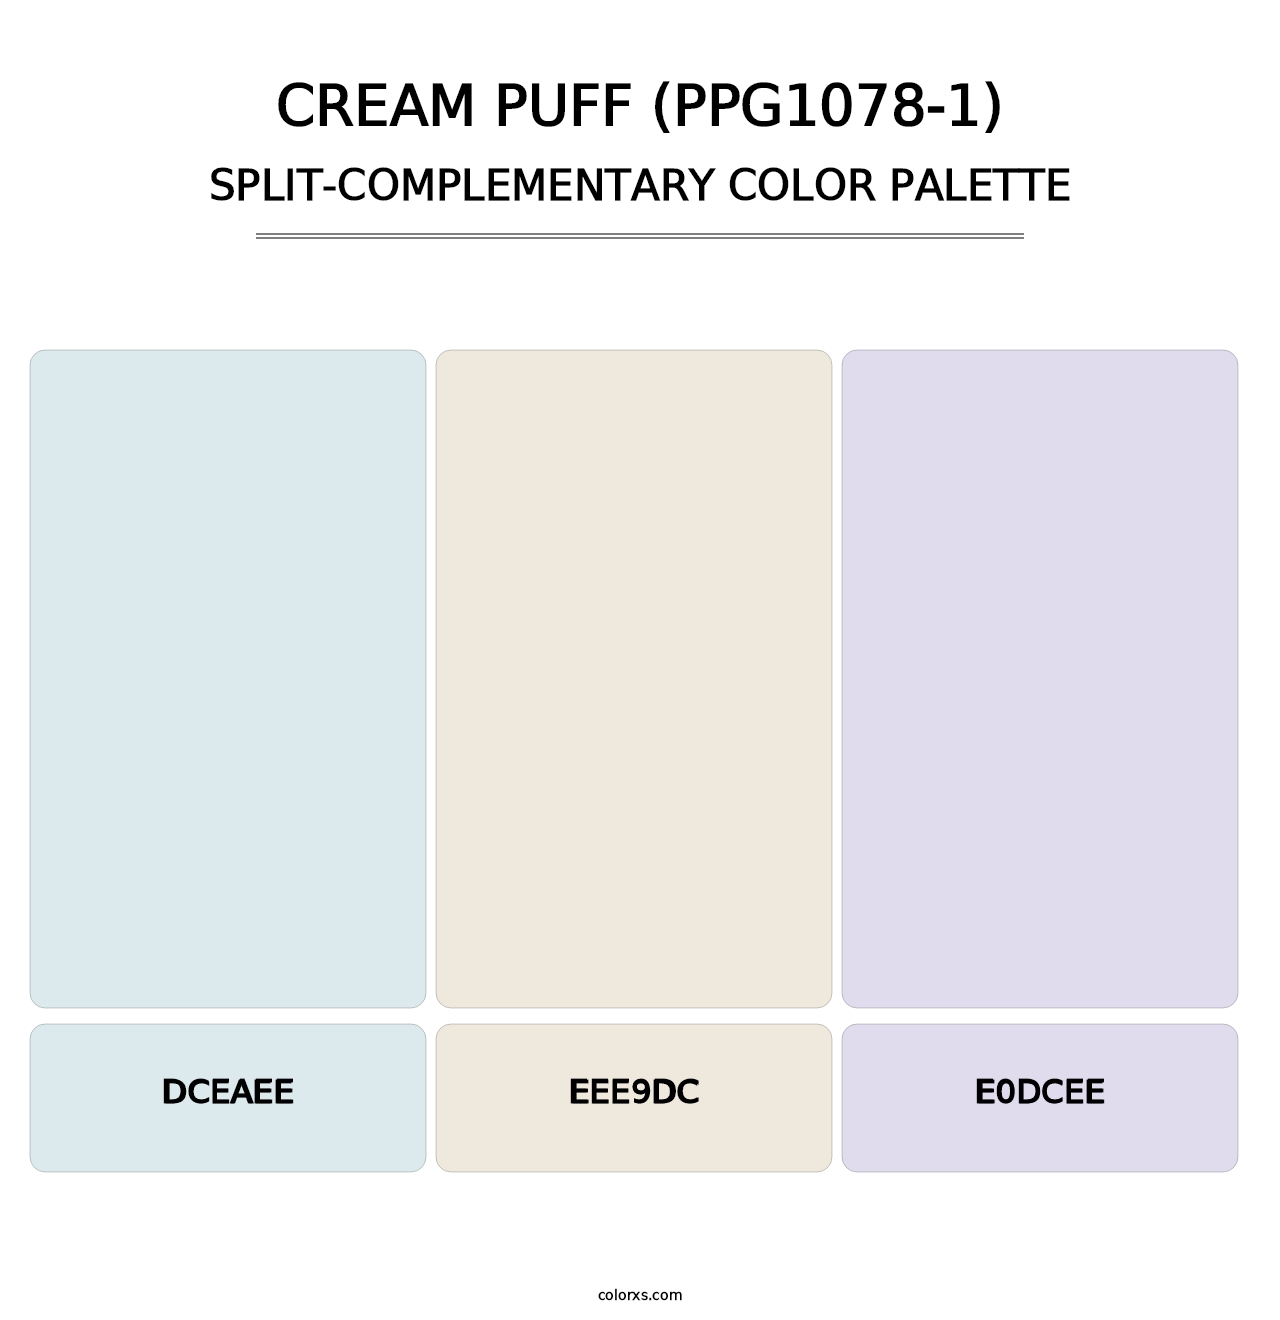 Cream Puff (PPG1078-1) - Split-Complementary Color Palette